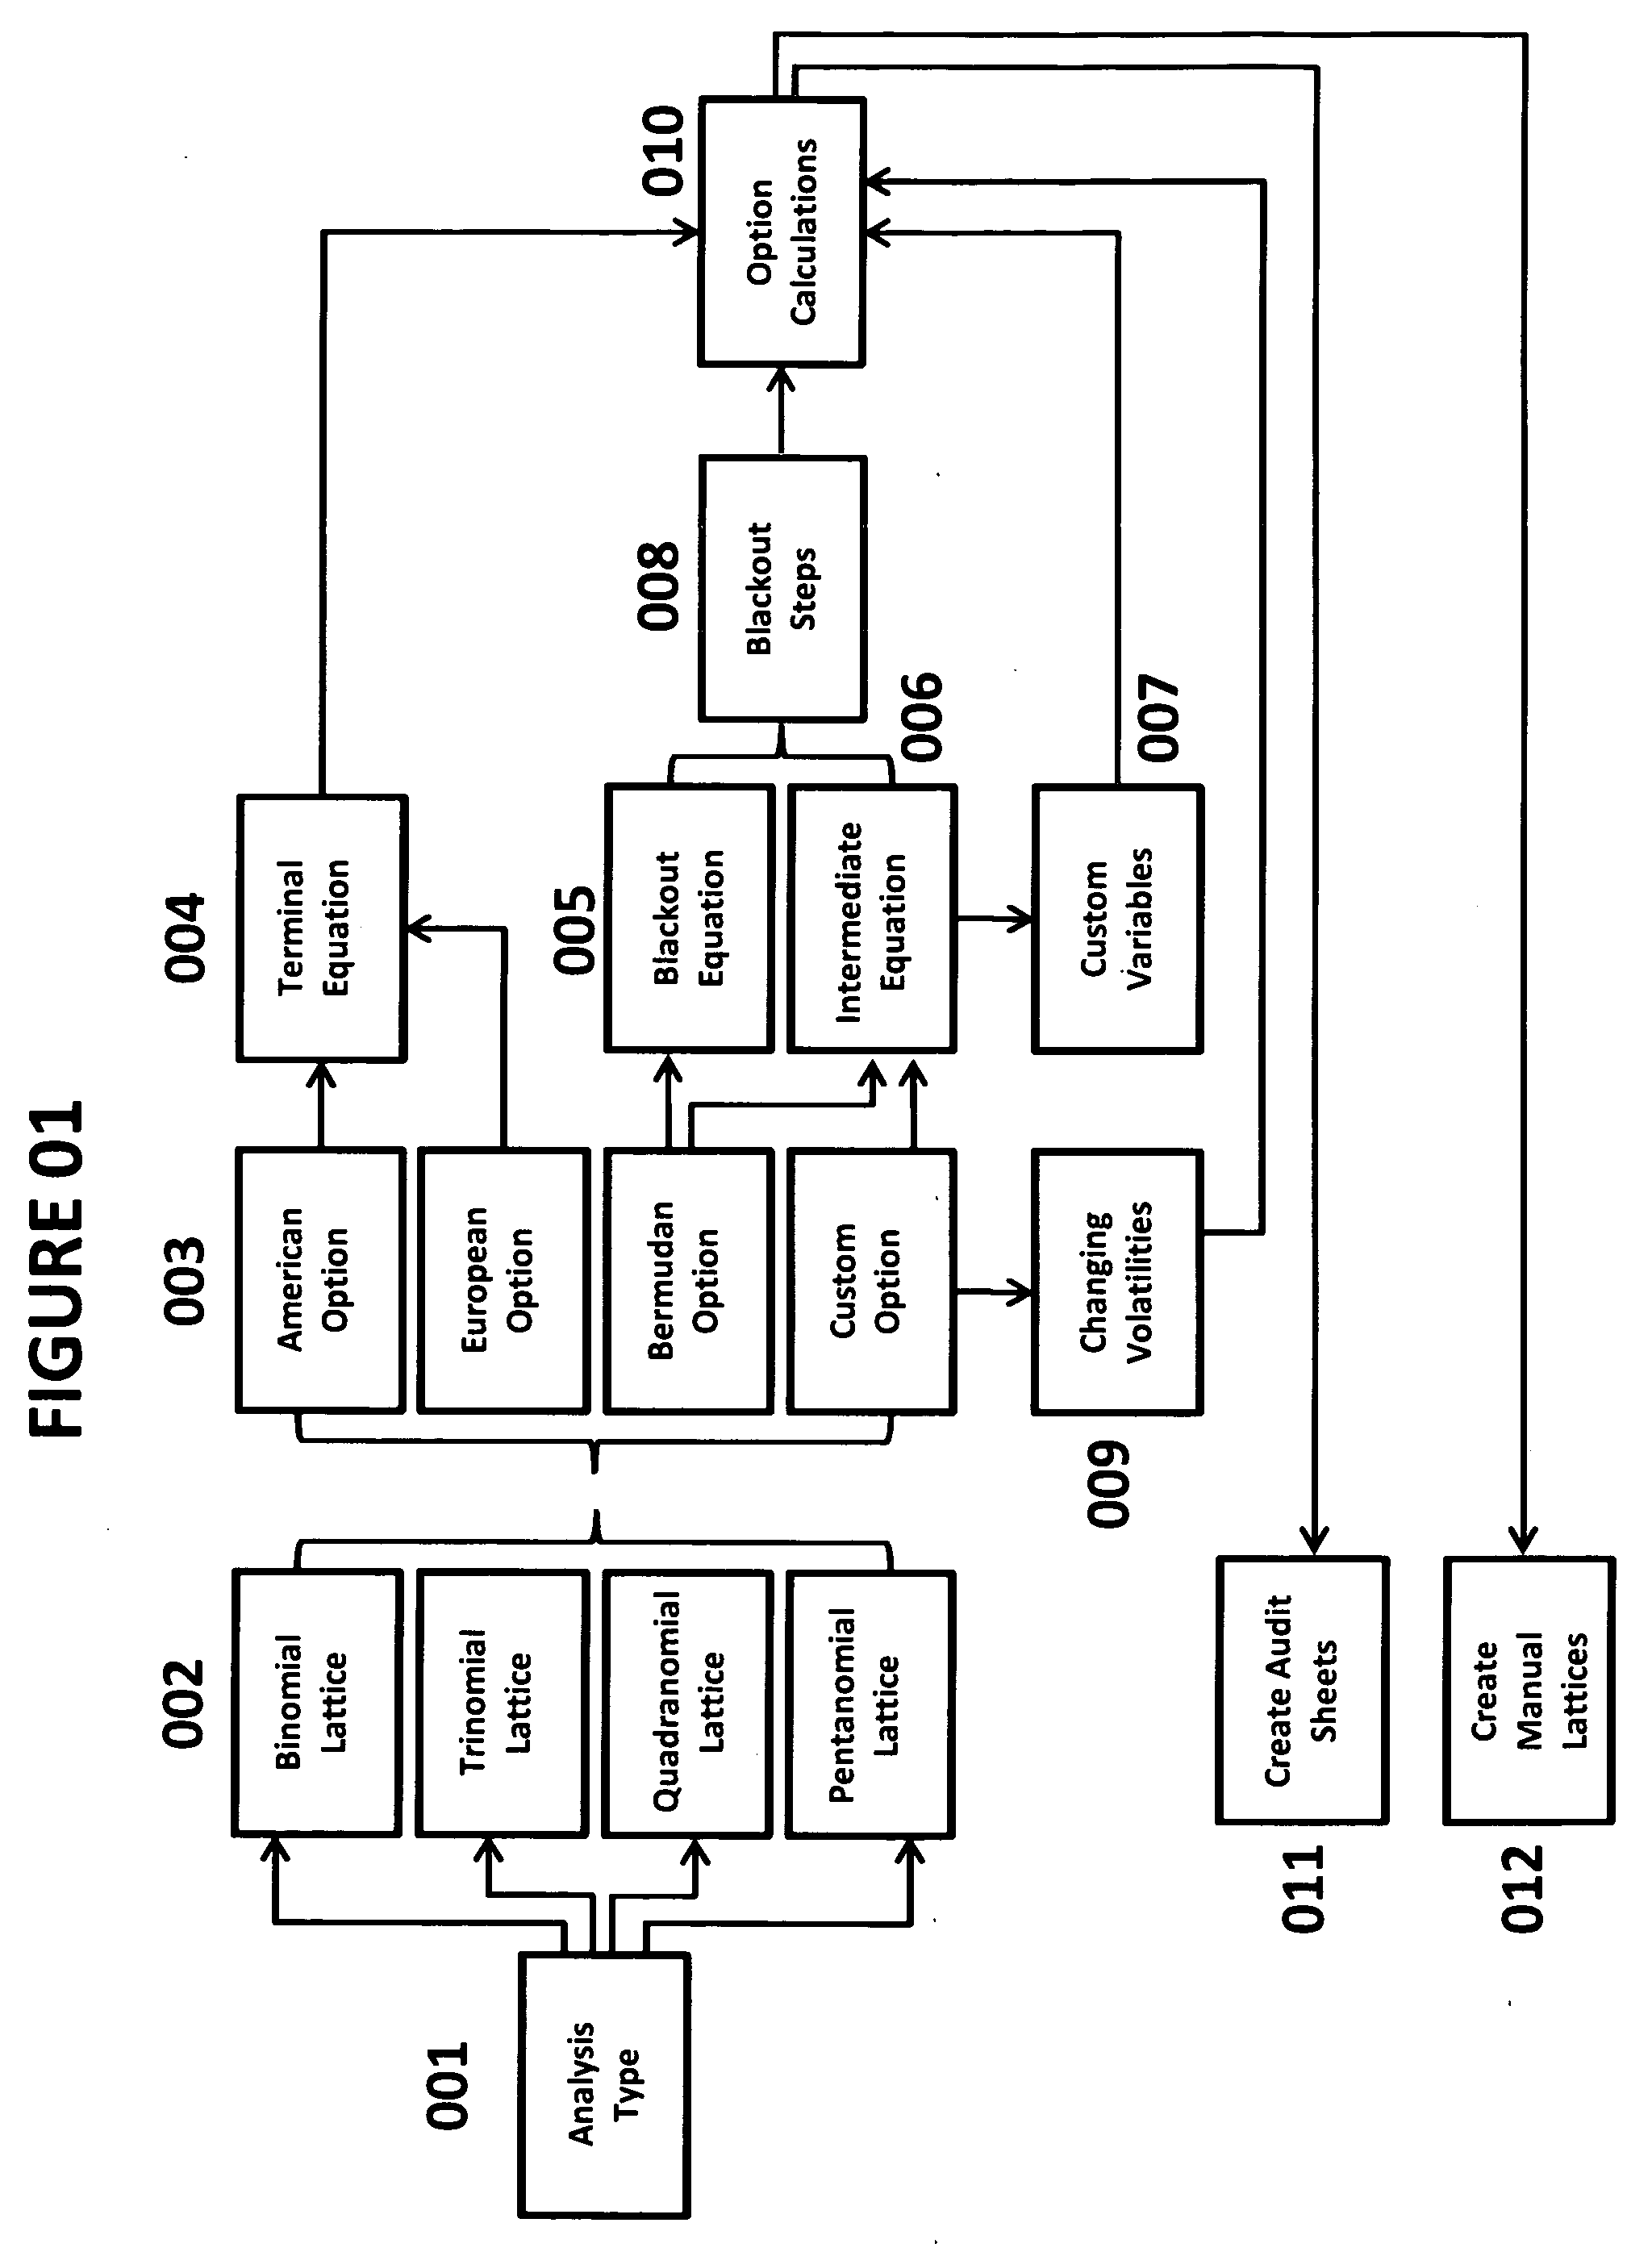 Financial options system and method